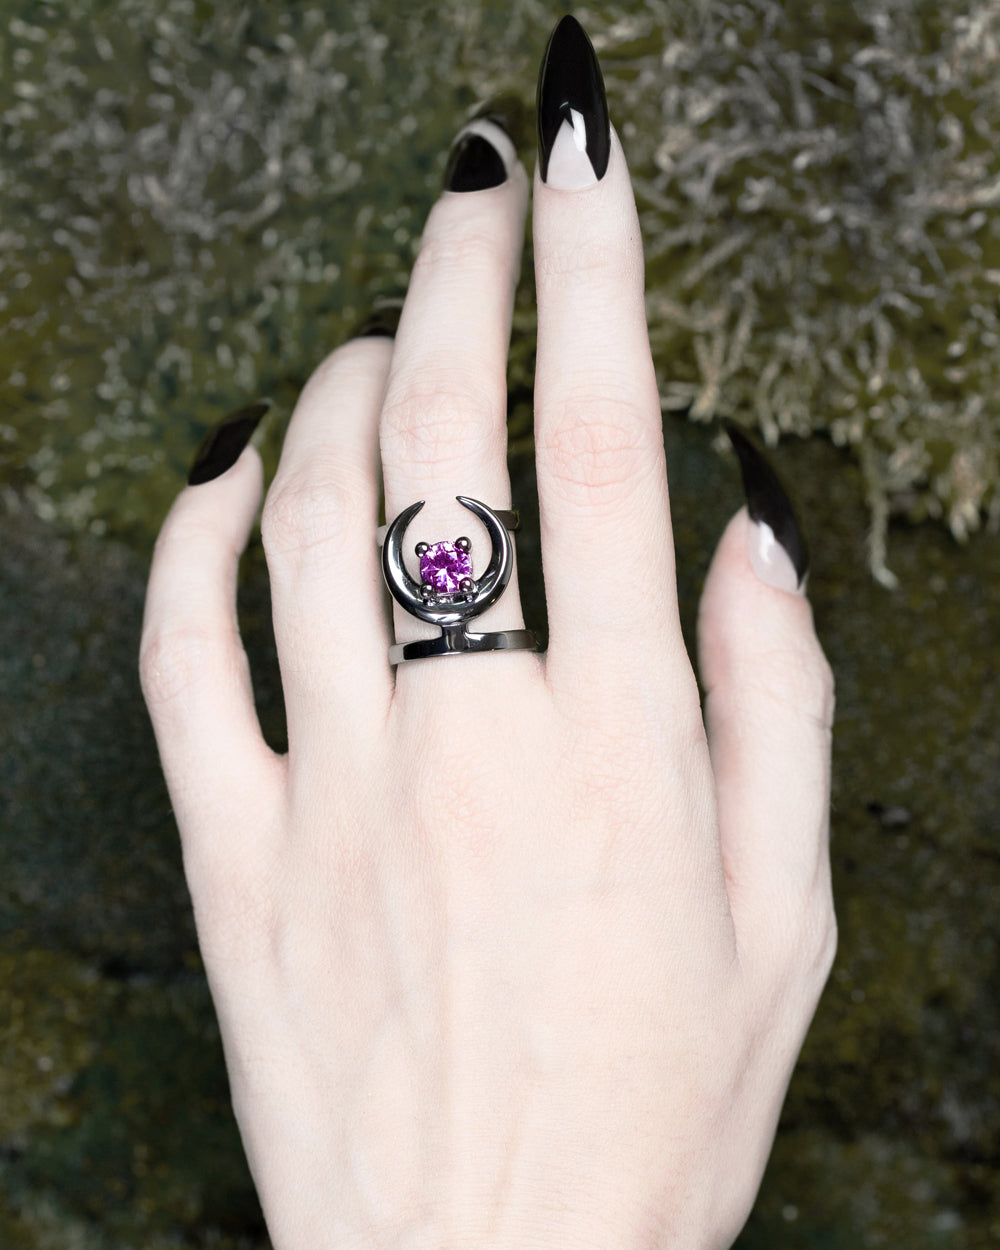 Occult Black Silver Ring US5 to US10